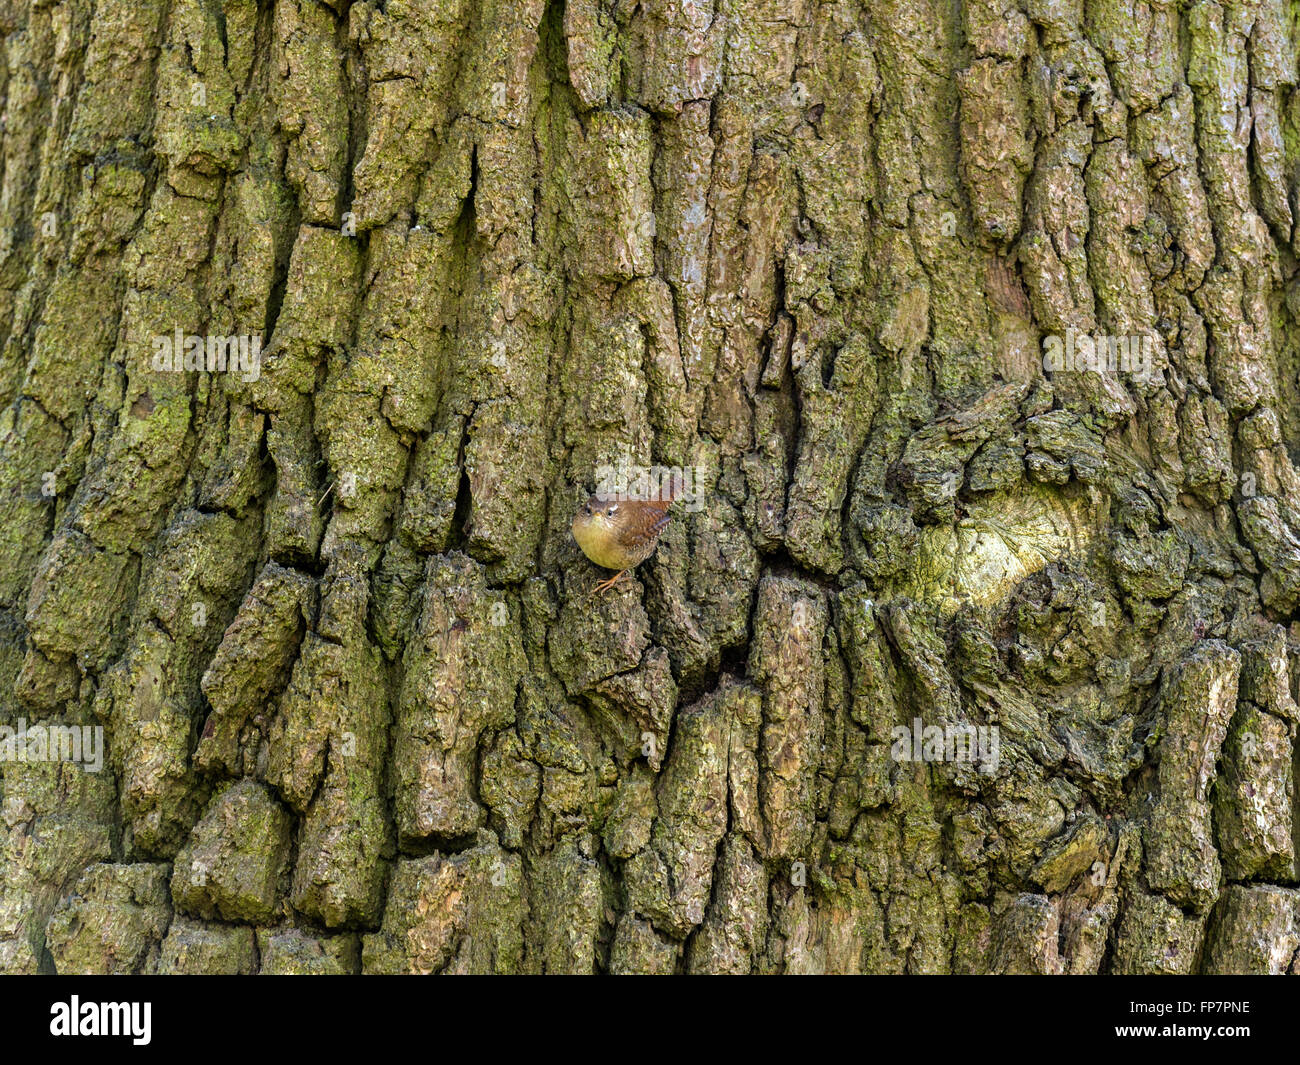 'British Wren (Troglodytidae) depicted posturing, almost invisible, blending in to the tree trunk' Stock Photo